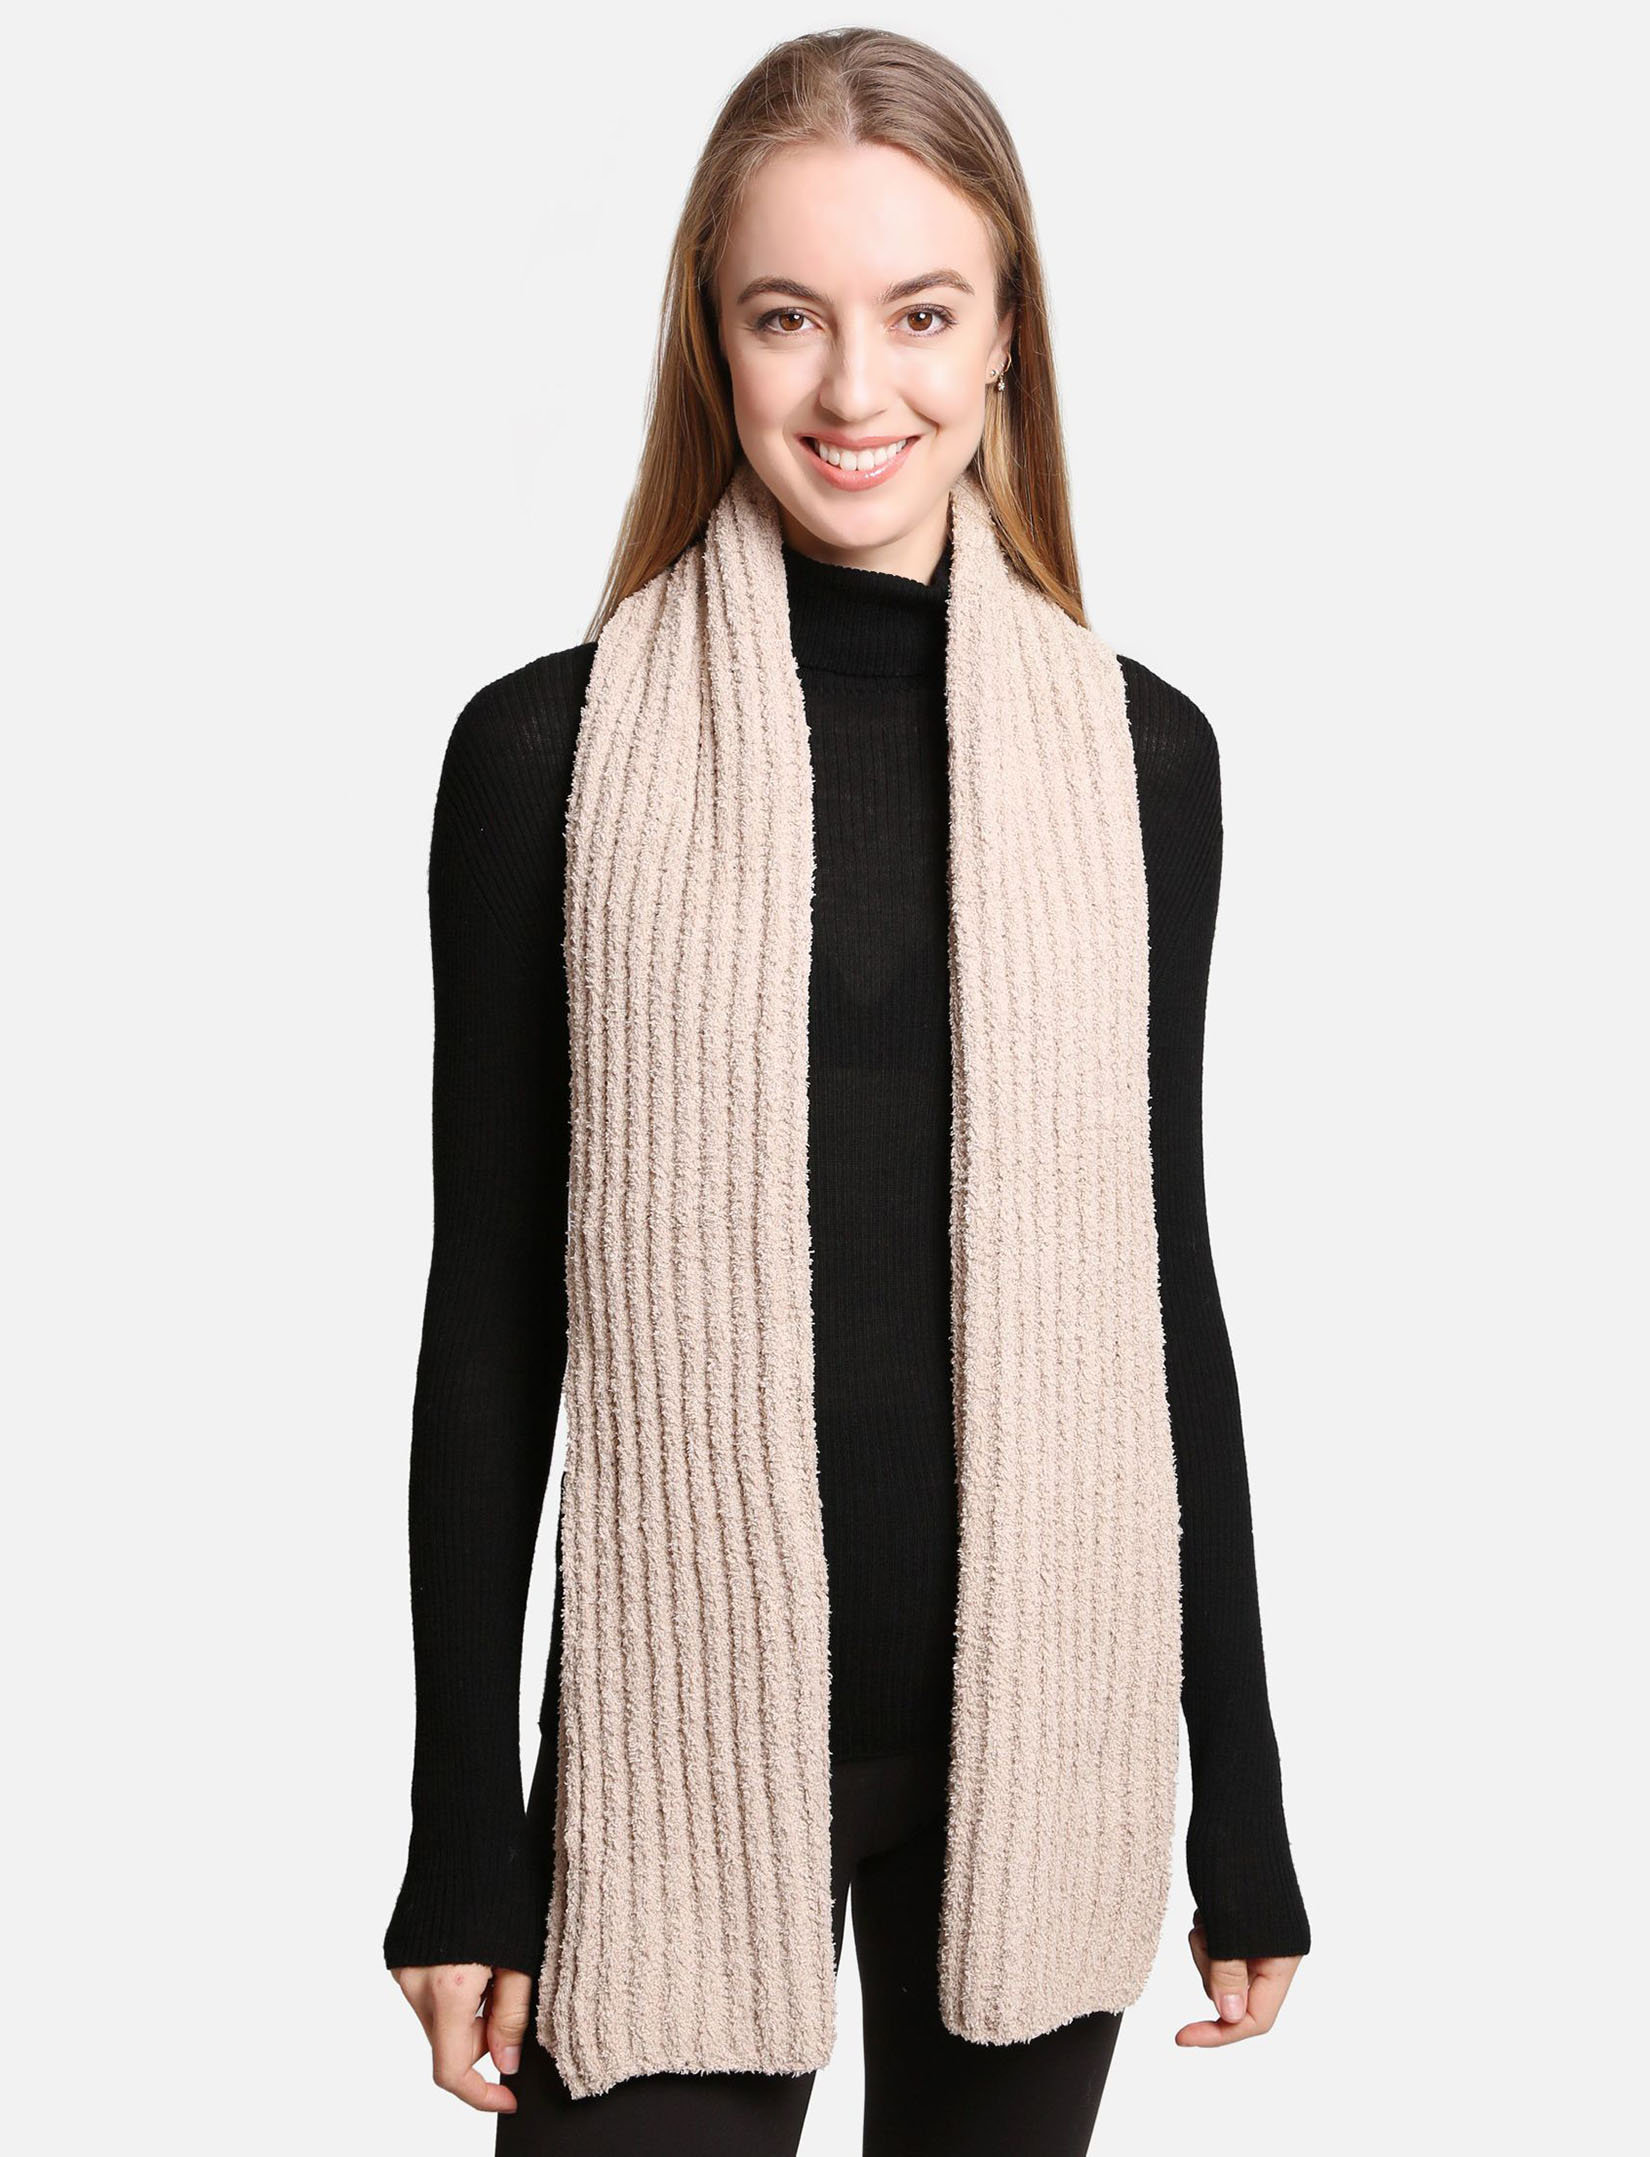 2201 - LUX Soft Knitted Scarf